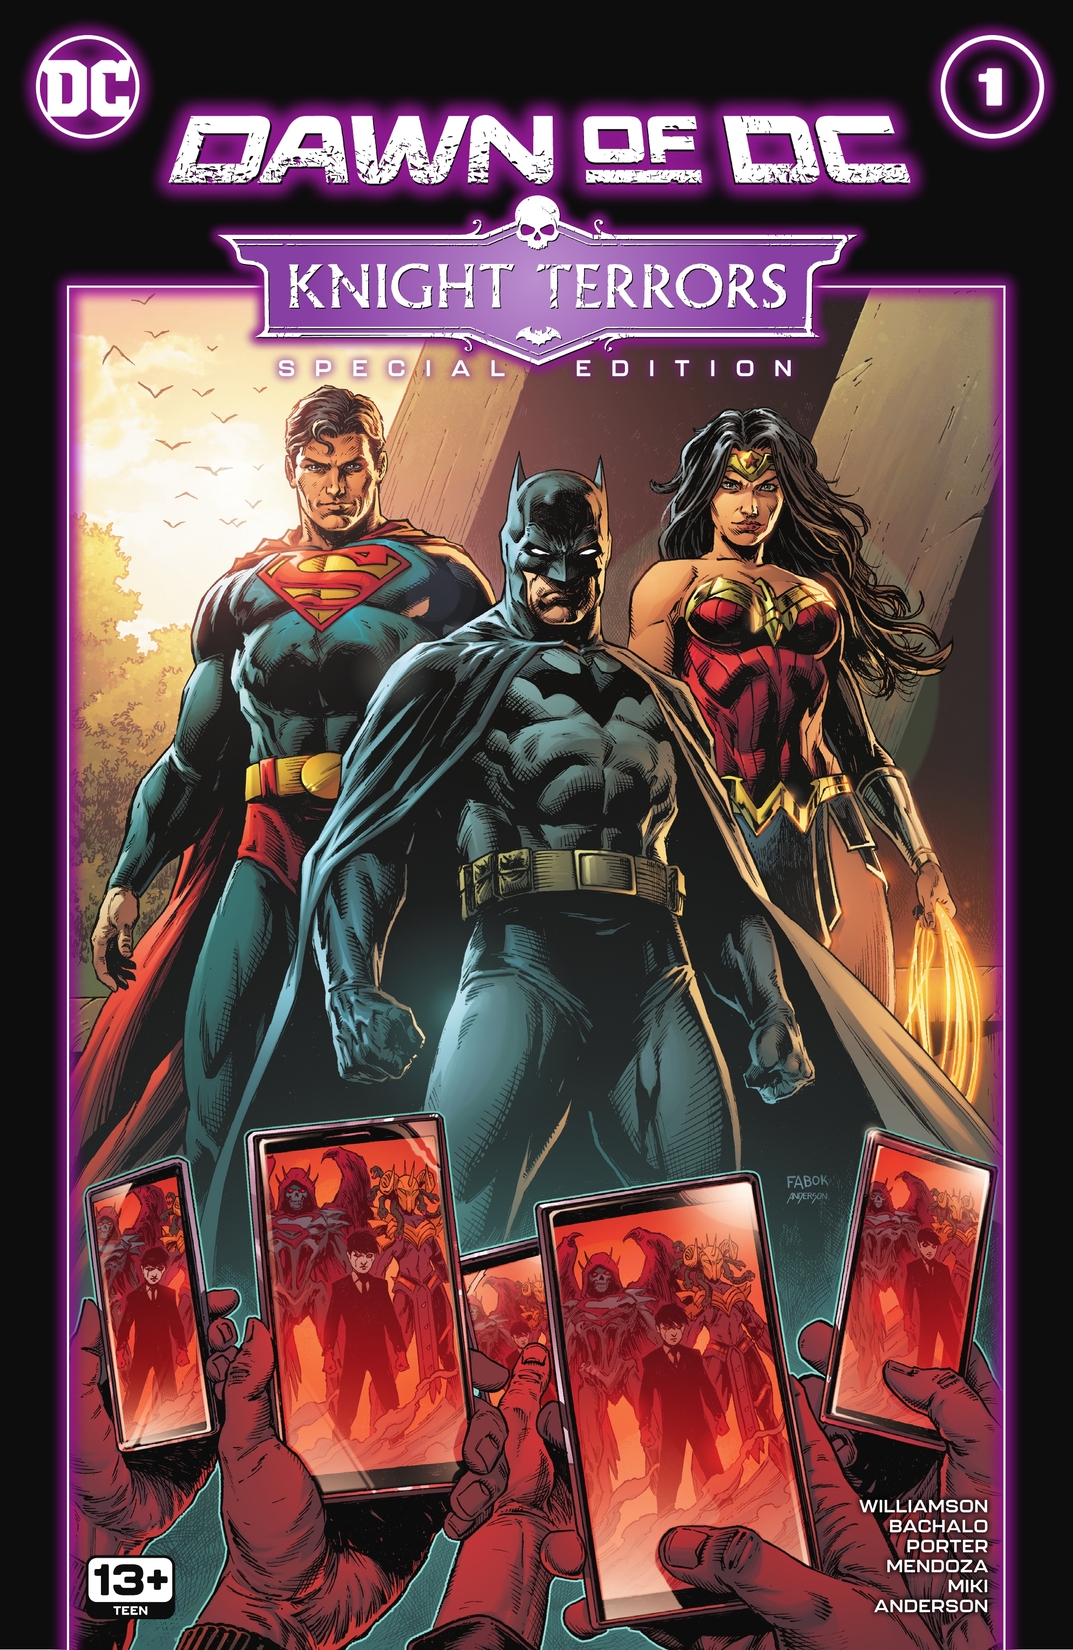 Dawn of DC Knight Terrors 2023 FCBD Special Edition #1 preview images